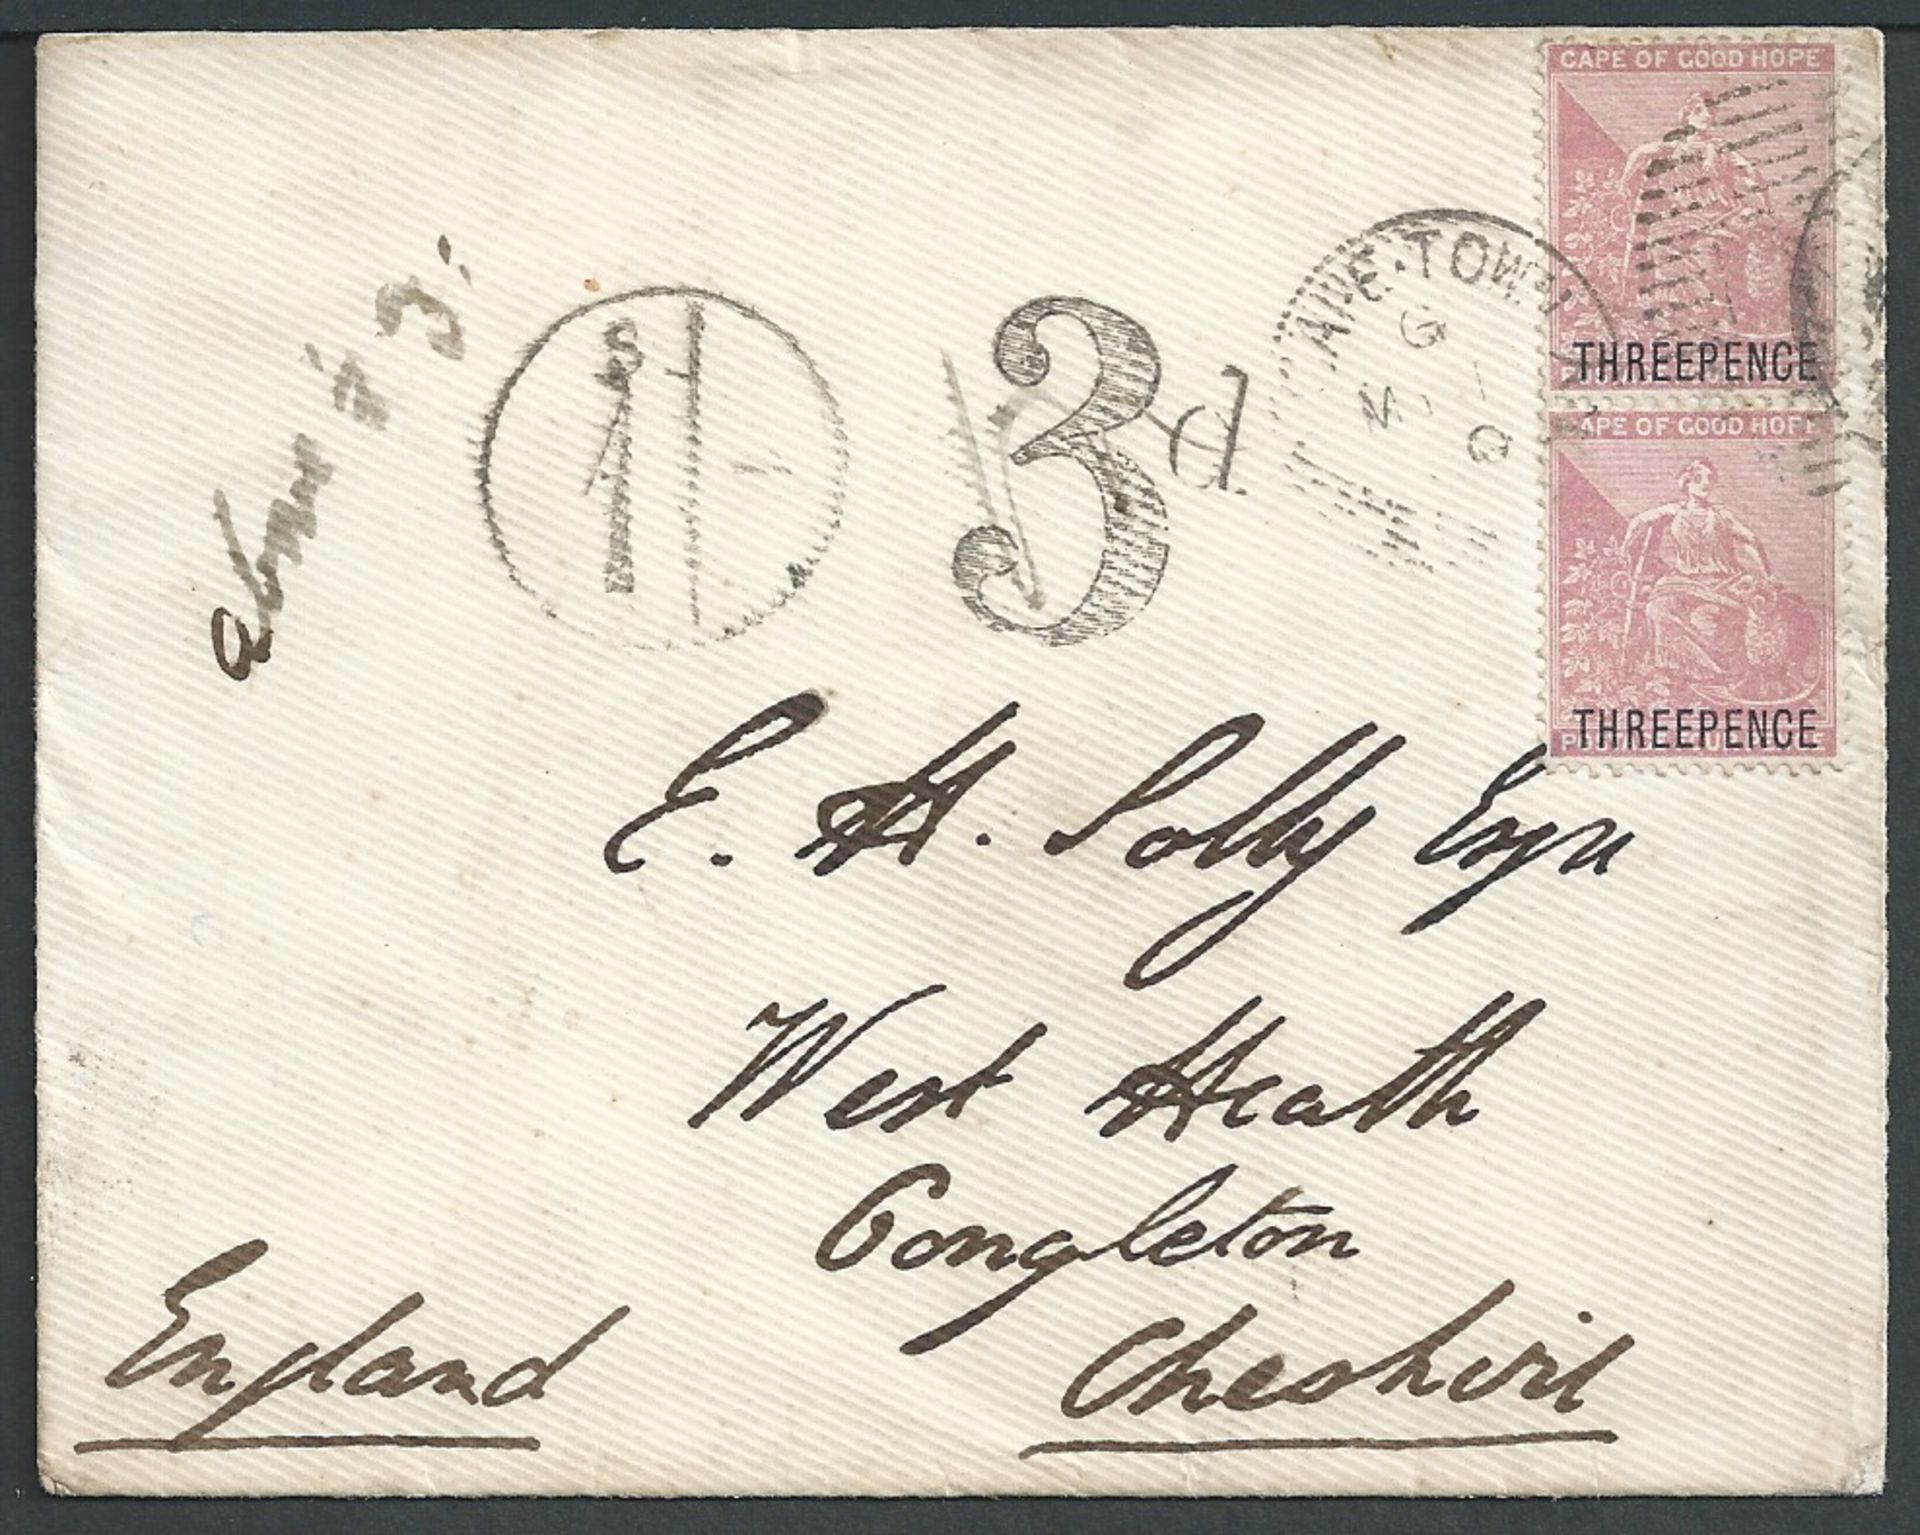 Cape of Good Hope / GB - Postage Dues 1880 Cover from Cape Town to England